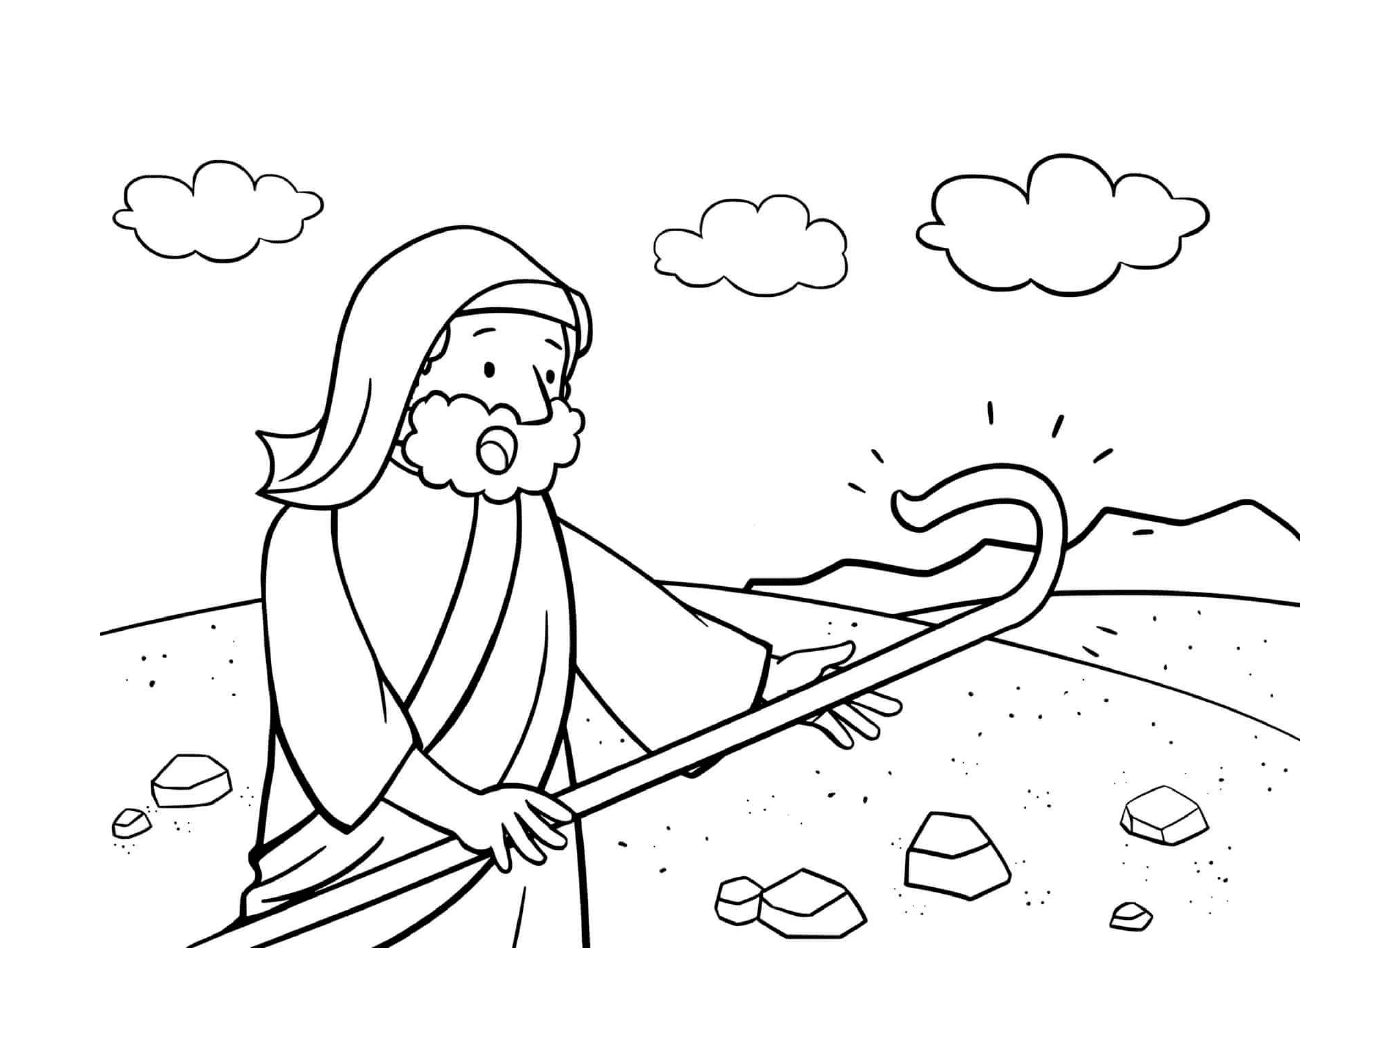  Doubt of Moses, man holding a stick 